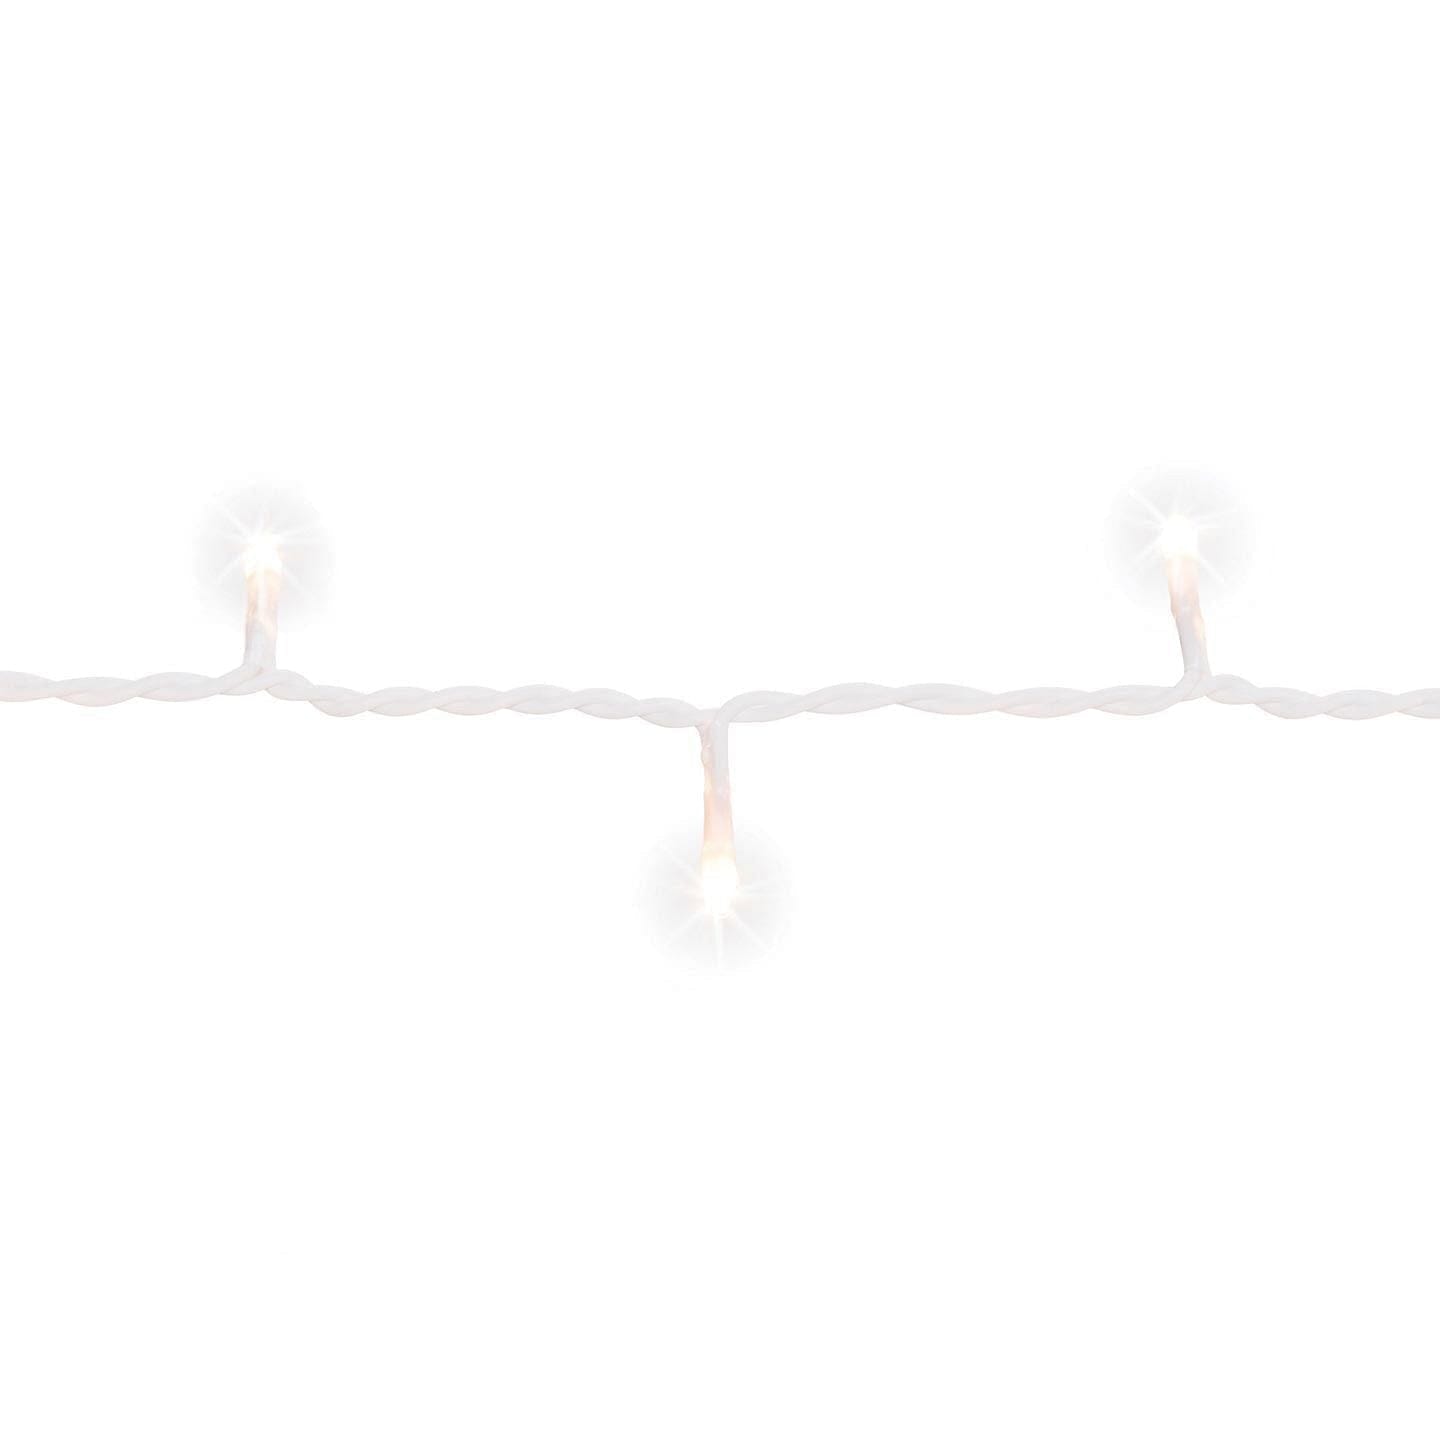 20 White Rice Lights on White Cord - Shelburne Country Store